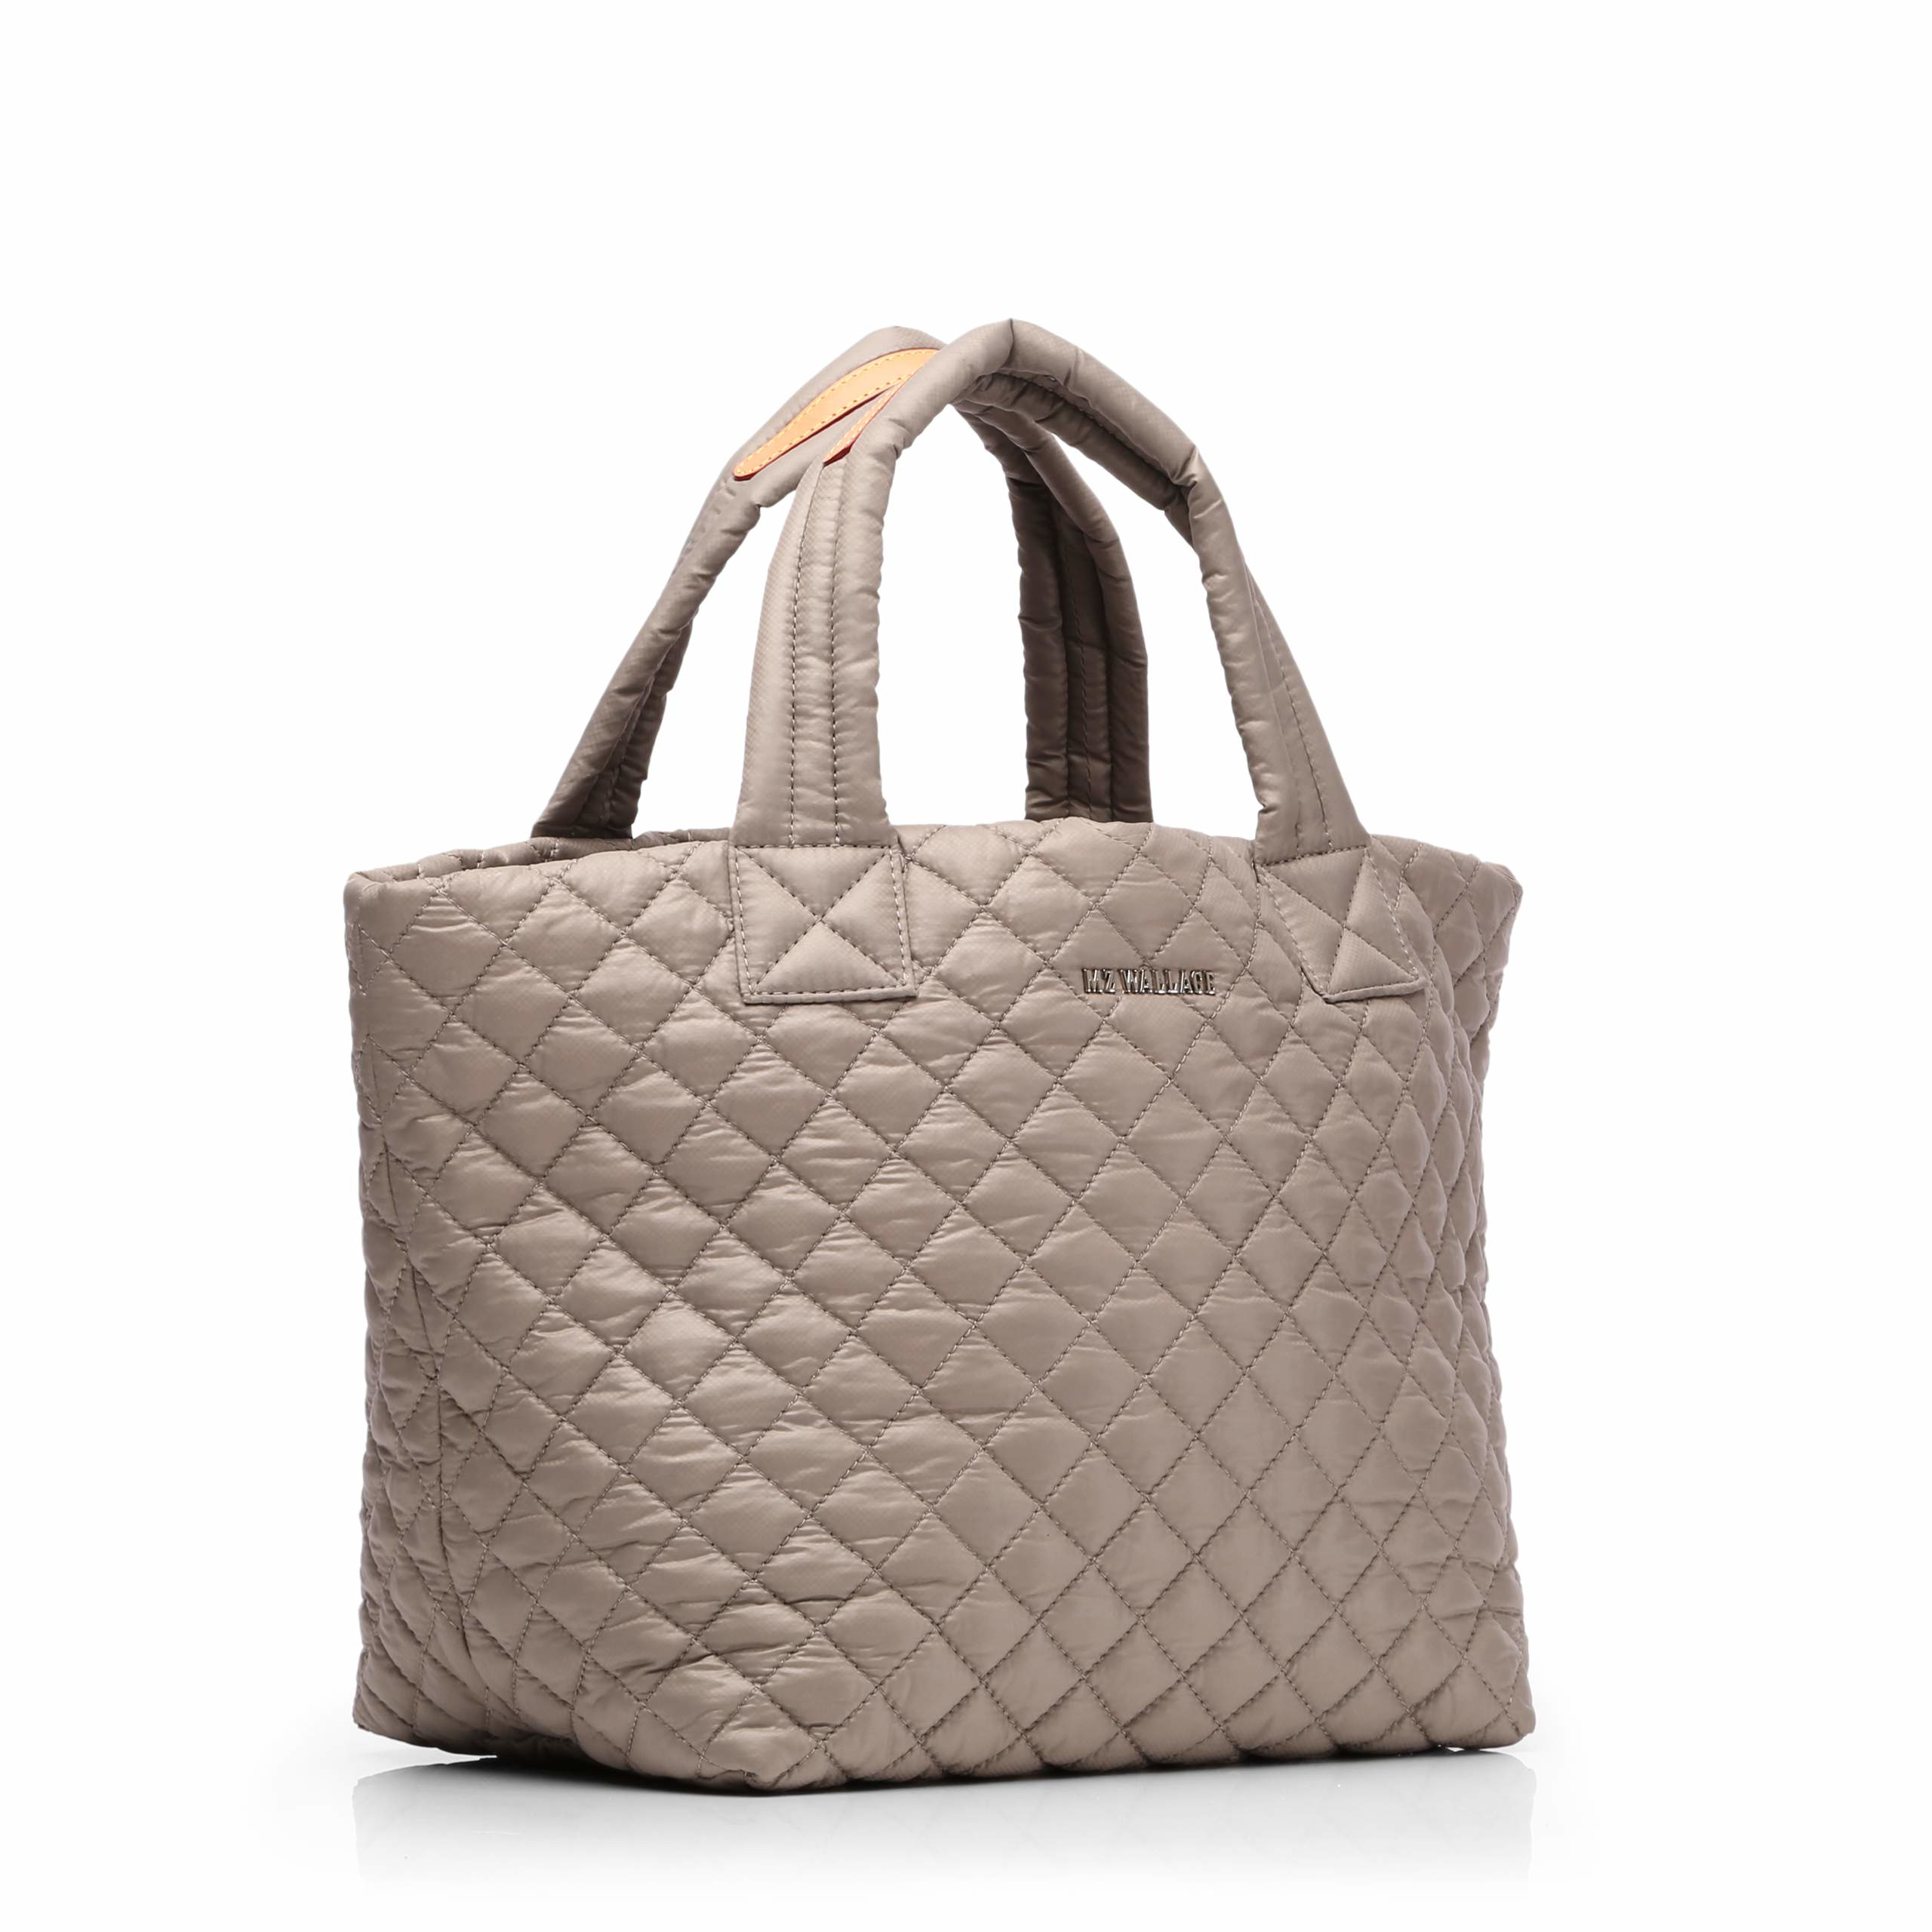 Lyst - Mz wallace Taupe Oxford Small Metro Tote in Brown